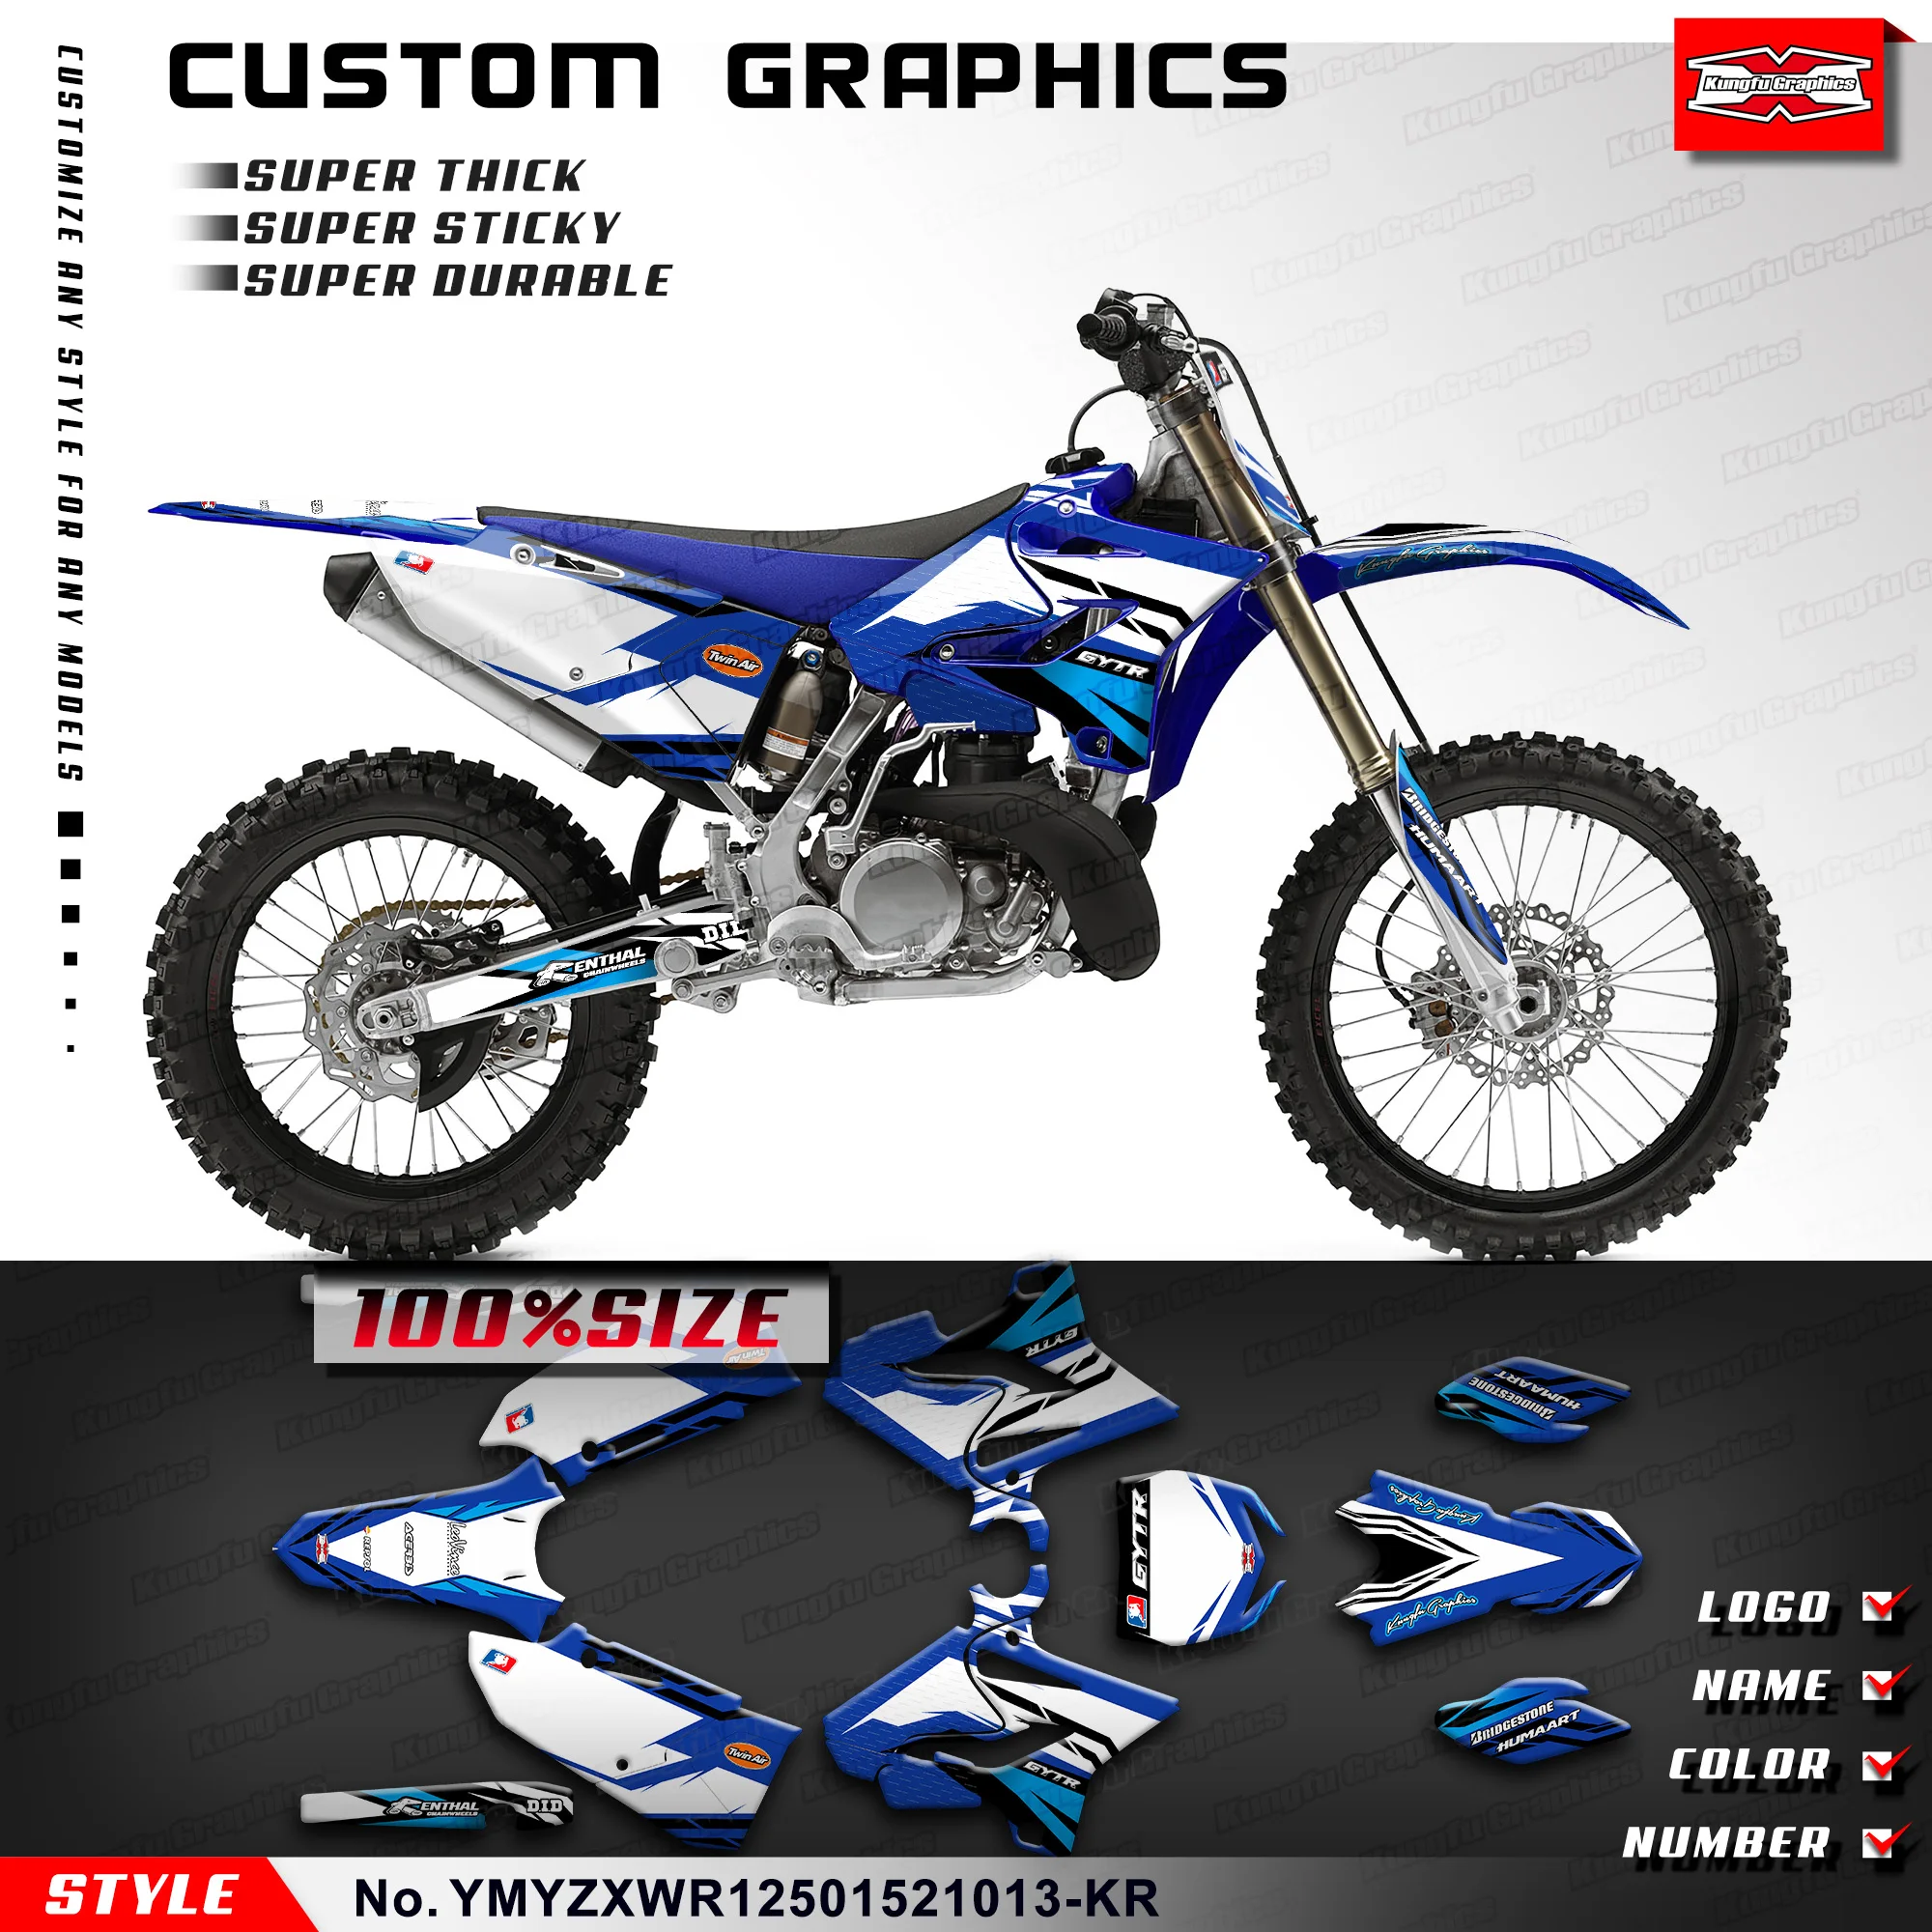 

KUNGFU GRAPHICS Aftermarket Stickers Decal Kit for Yamaha YZ125 YZ250 WR125 WR250 2015 2016 2017 2018 2019 2020 2021